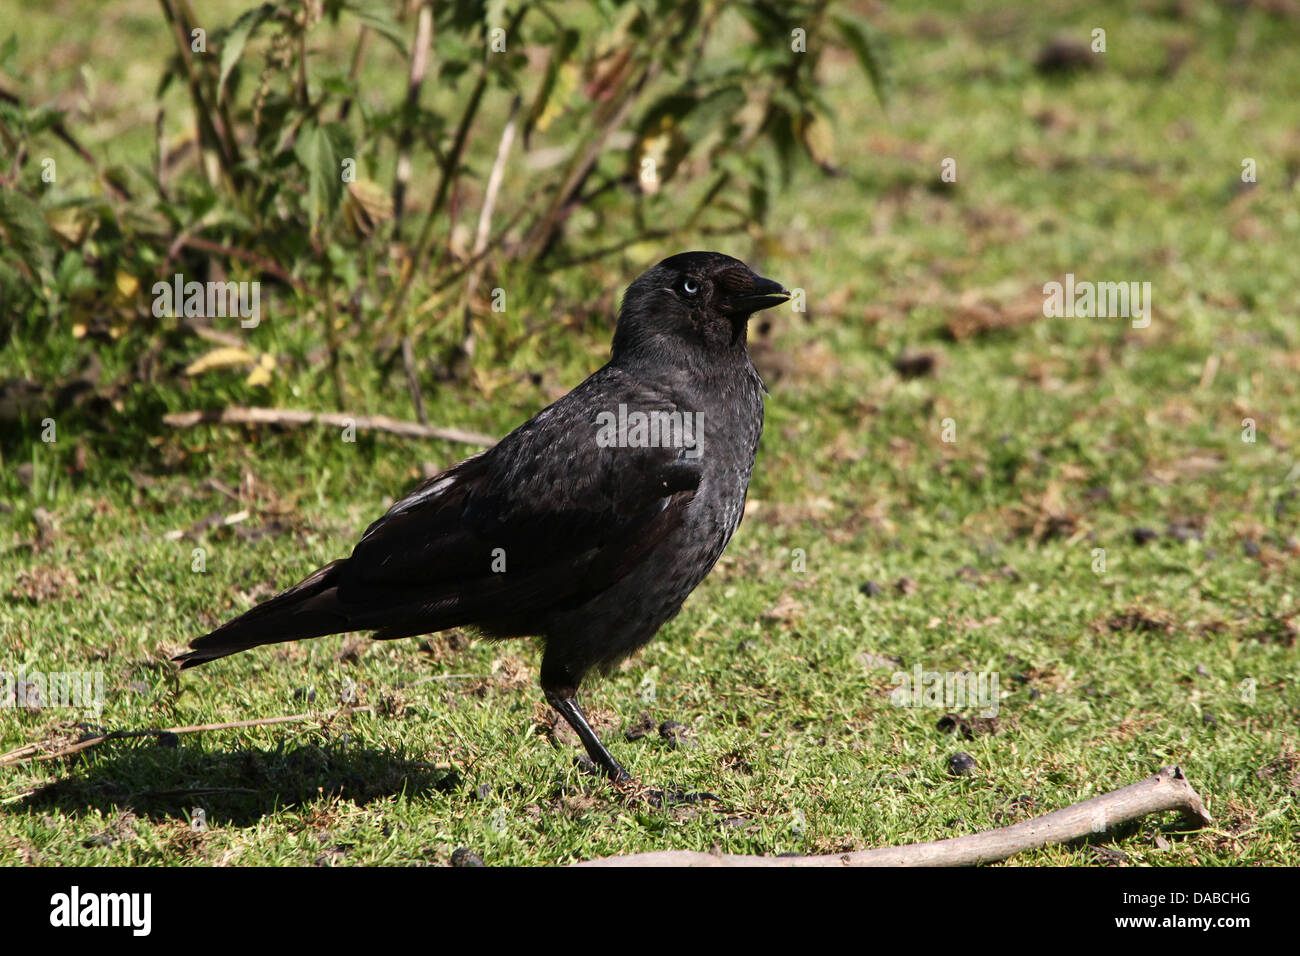 Detailed series of images of a European Jackdaw (Corvus monedula) foraging and posing in the grass (over 40 photos in series) Stock Photo